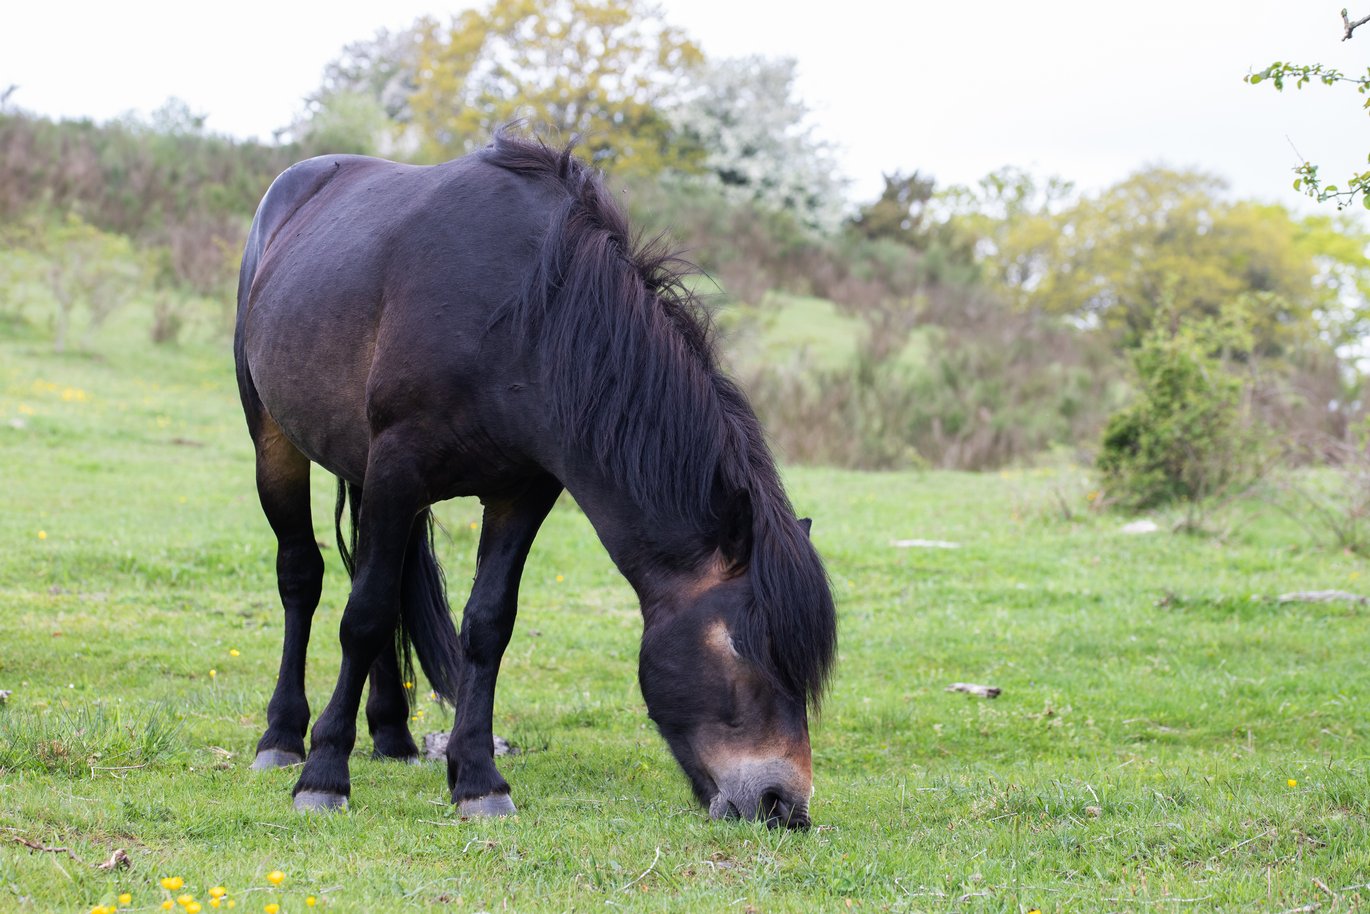 A black horse grazing in a meadow